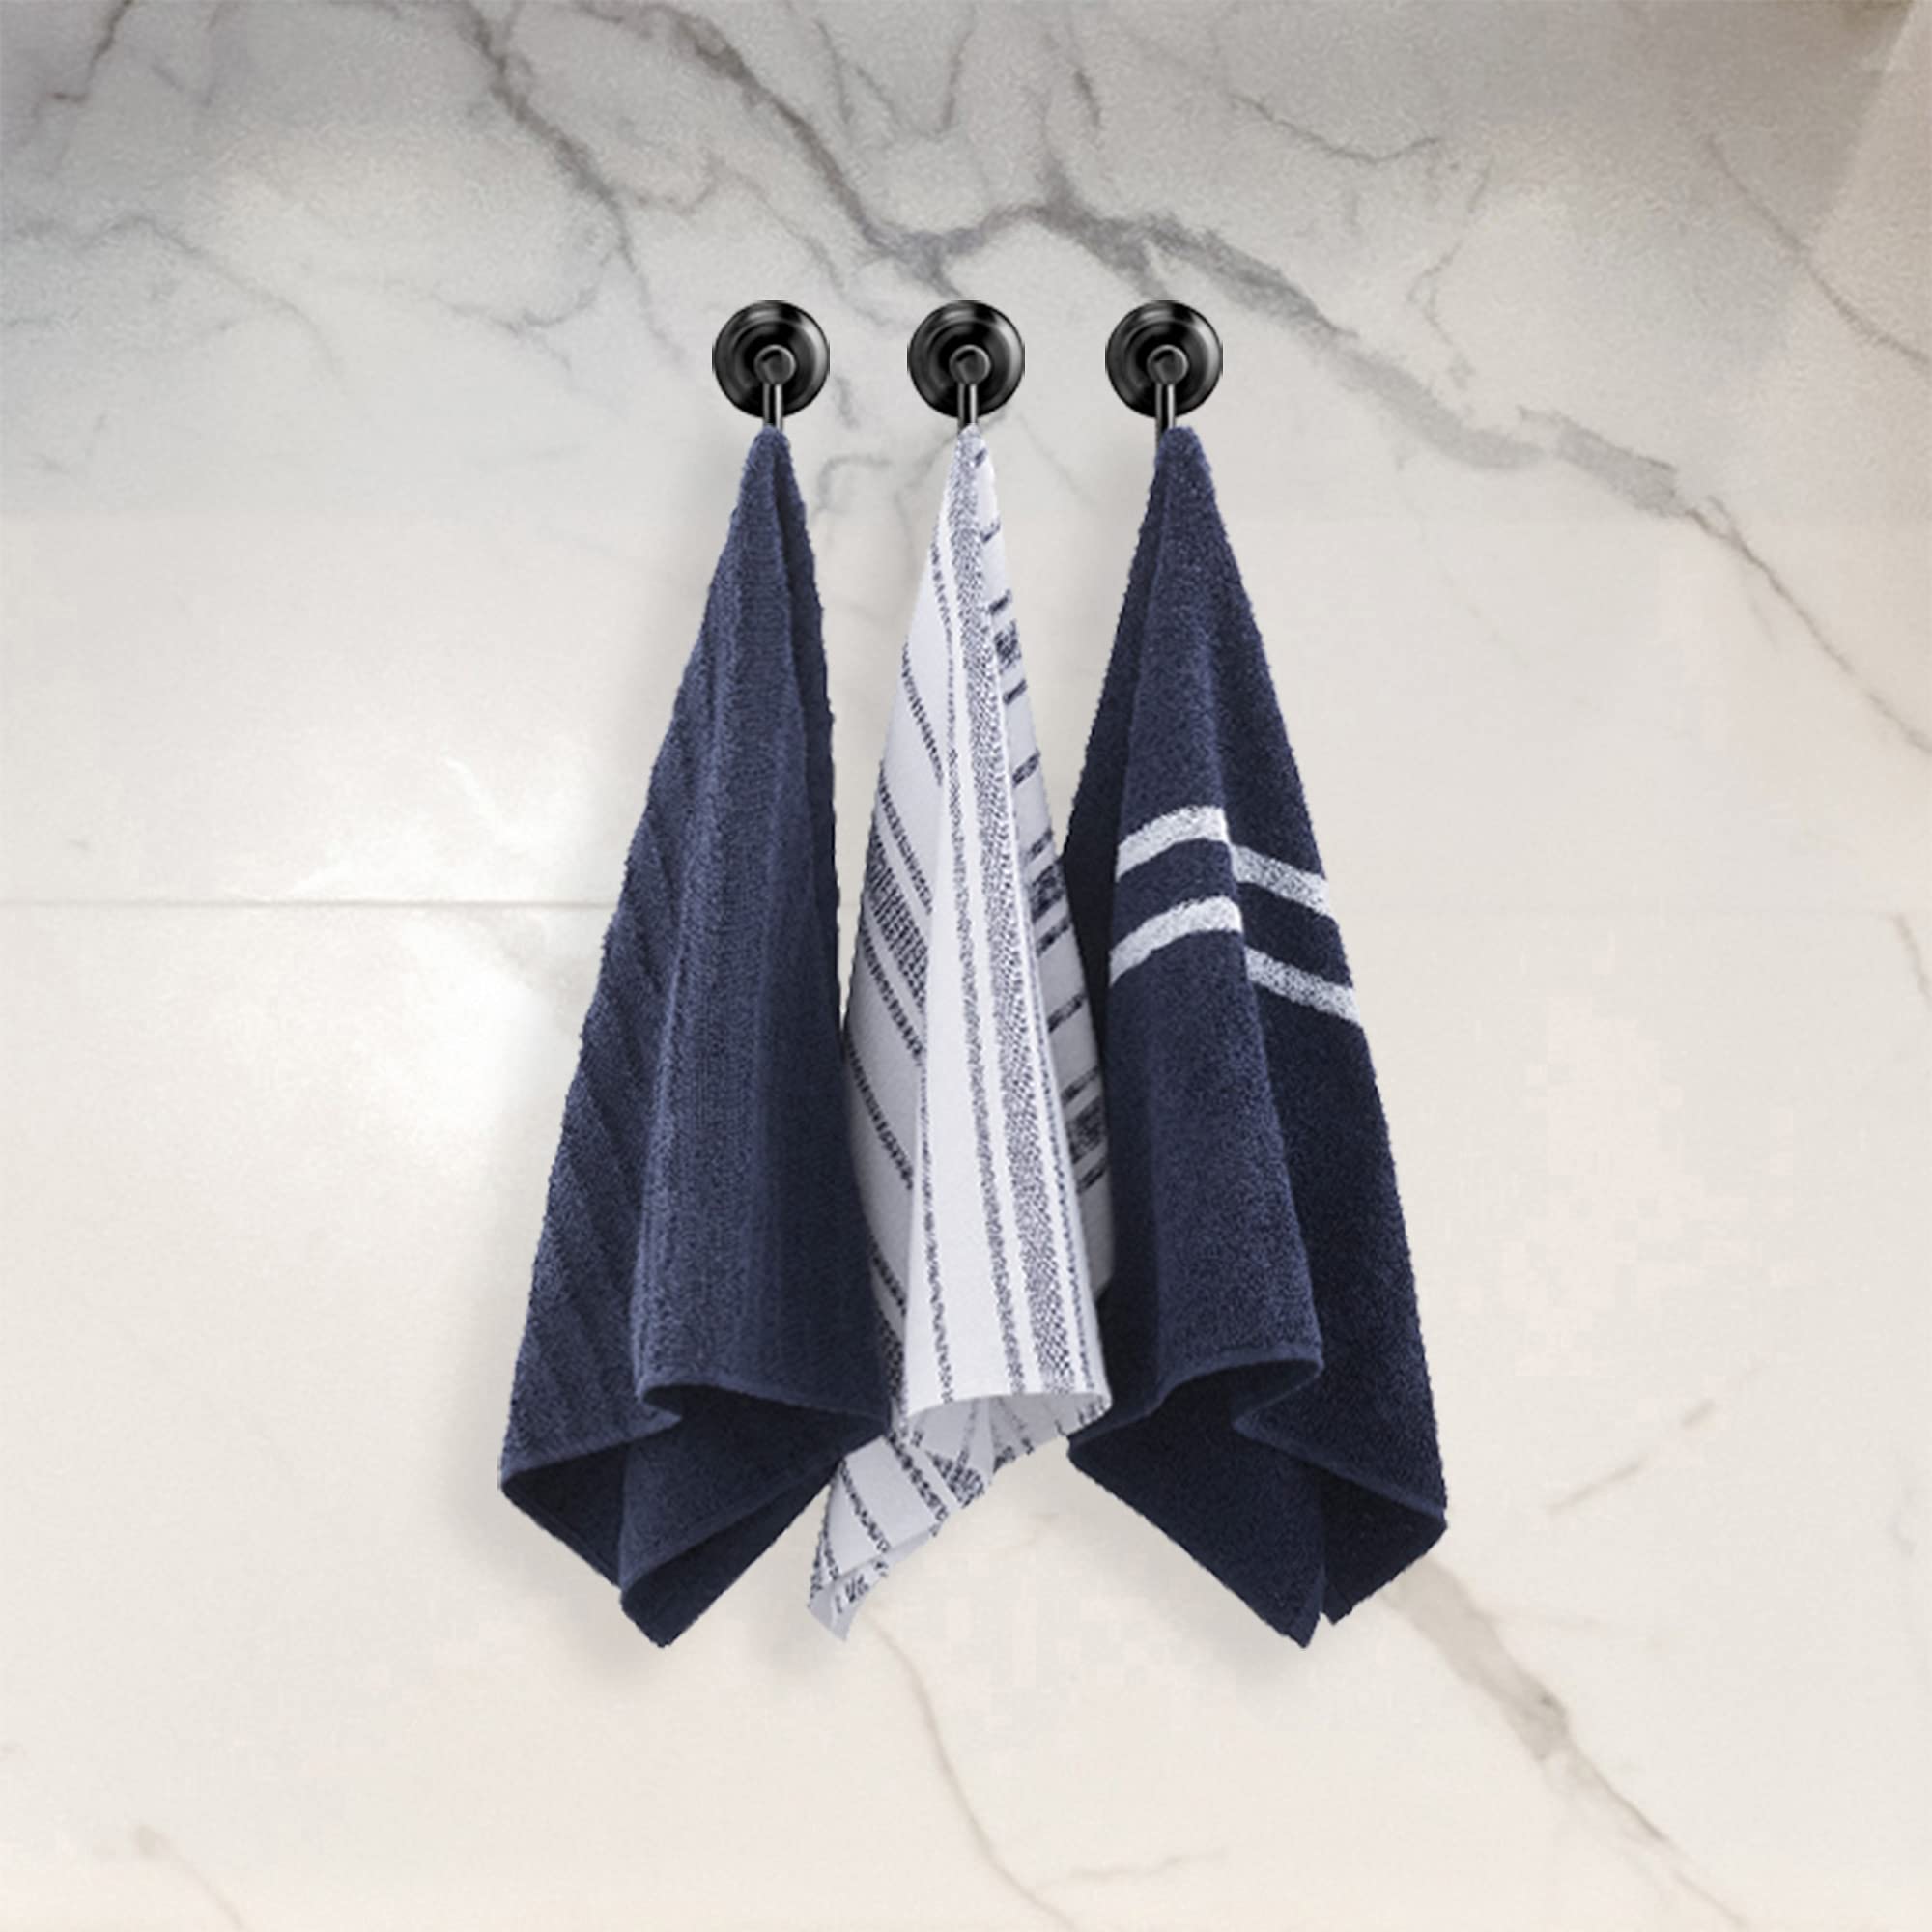 Nautica 100% Cotton Kitchen Towels Set of 3 | 18" x 28" Super Absorbent Reusable Cleaning Cloths, Tea Towels, Hand Towels for Drying Dishes | Navy/White Multi Dish Towels for Kitchen